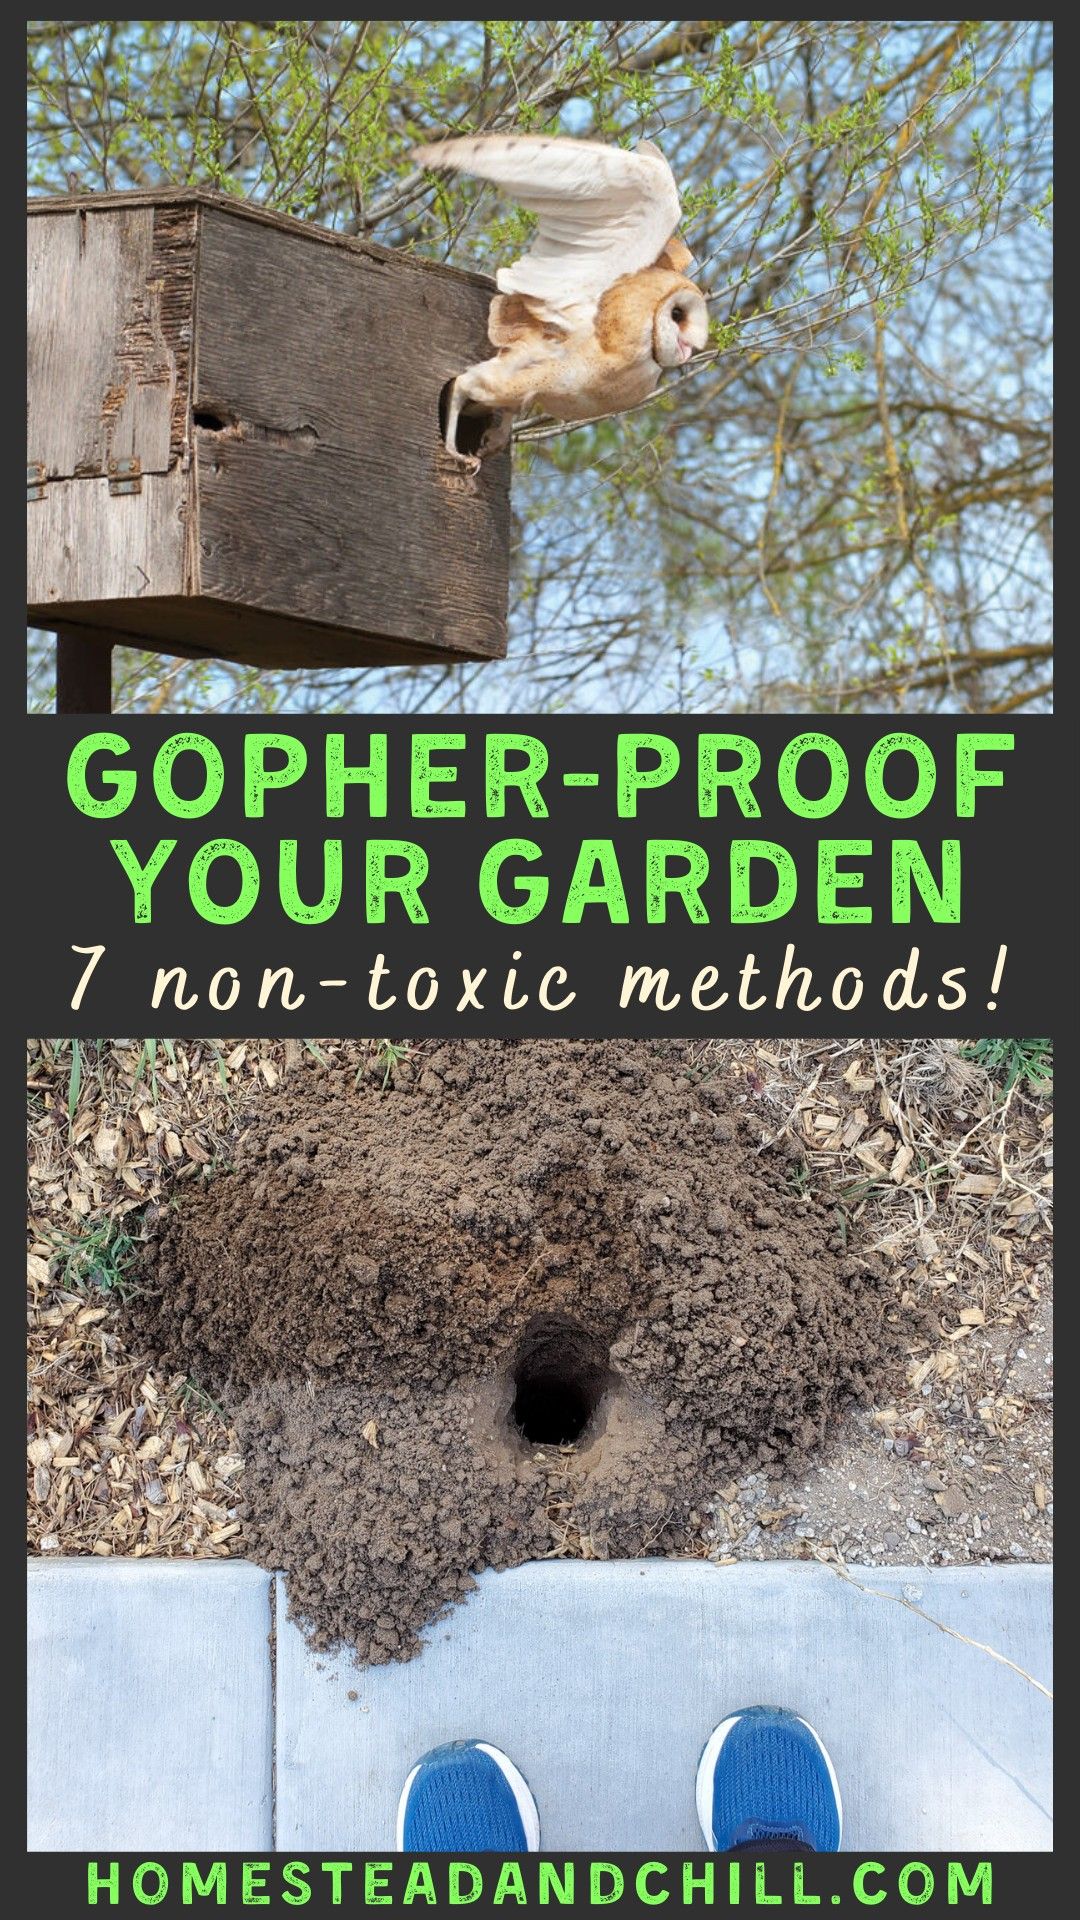 Non-Toxic Gopher Control: How to Gopher-Proof Your Garden